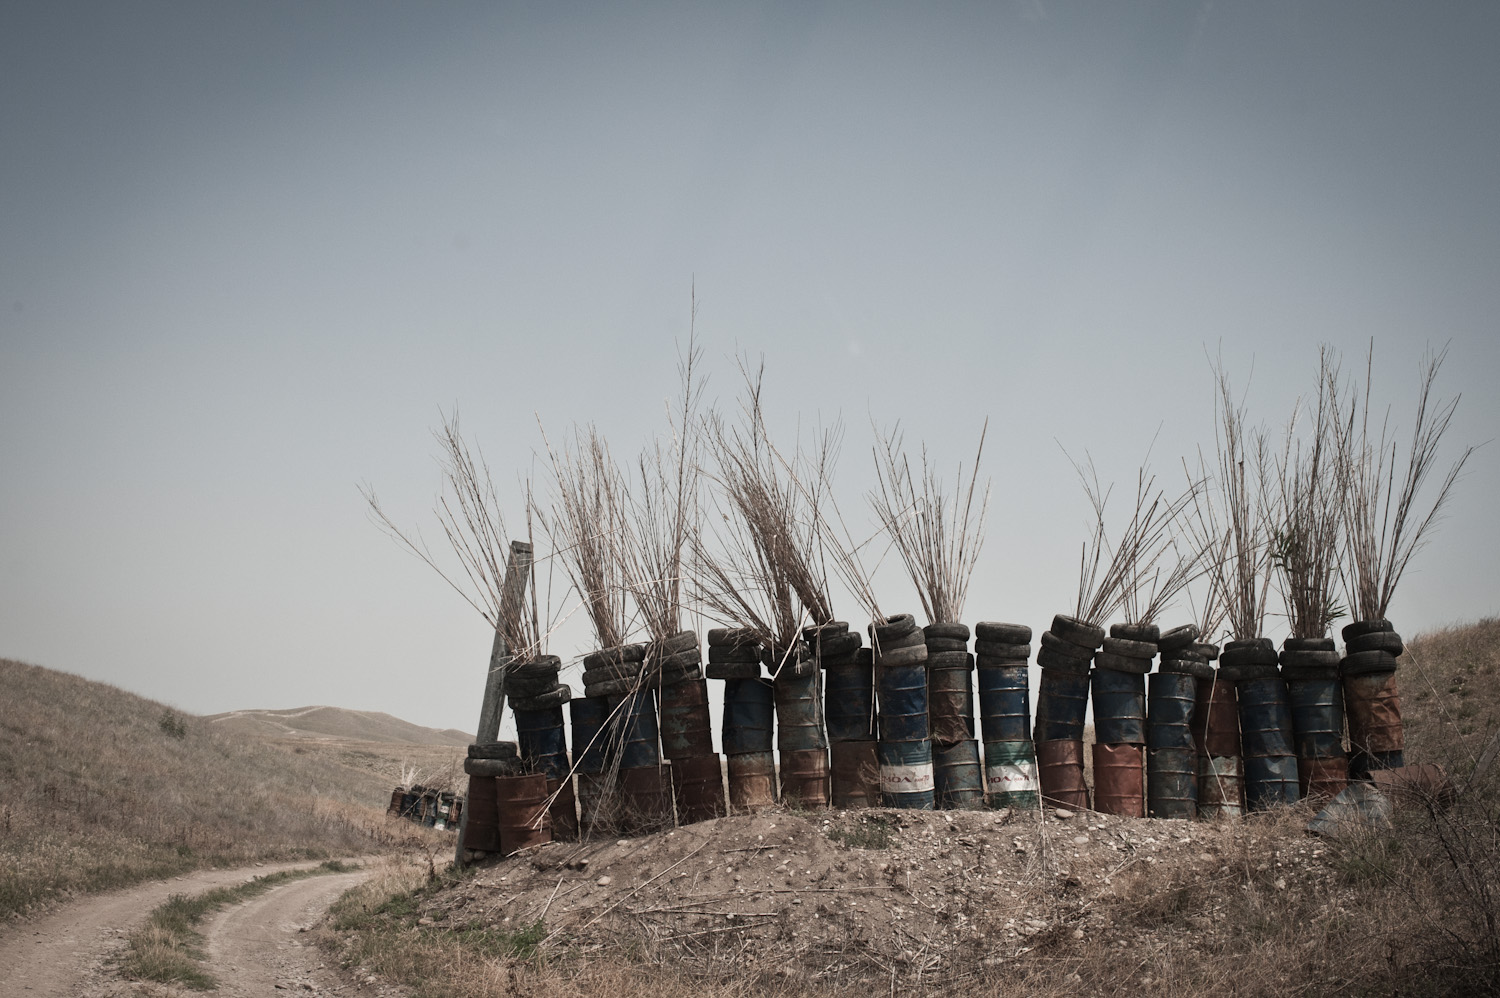  On the exposed portion of the road on the way to the Mataghis frontline is partially fortified against Azerbaijani gunfire by large metal canisters, tires and hay.  